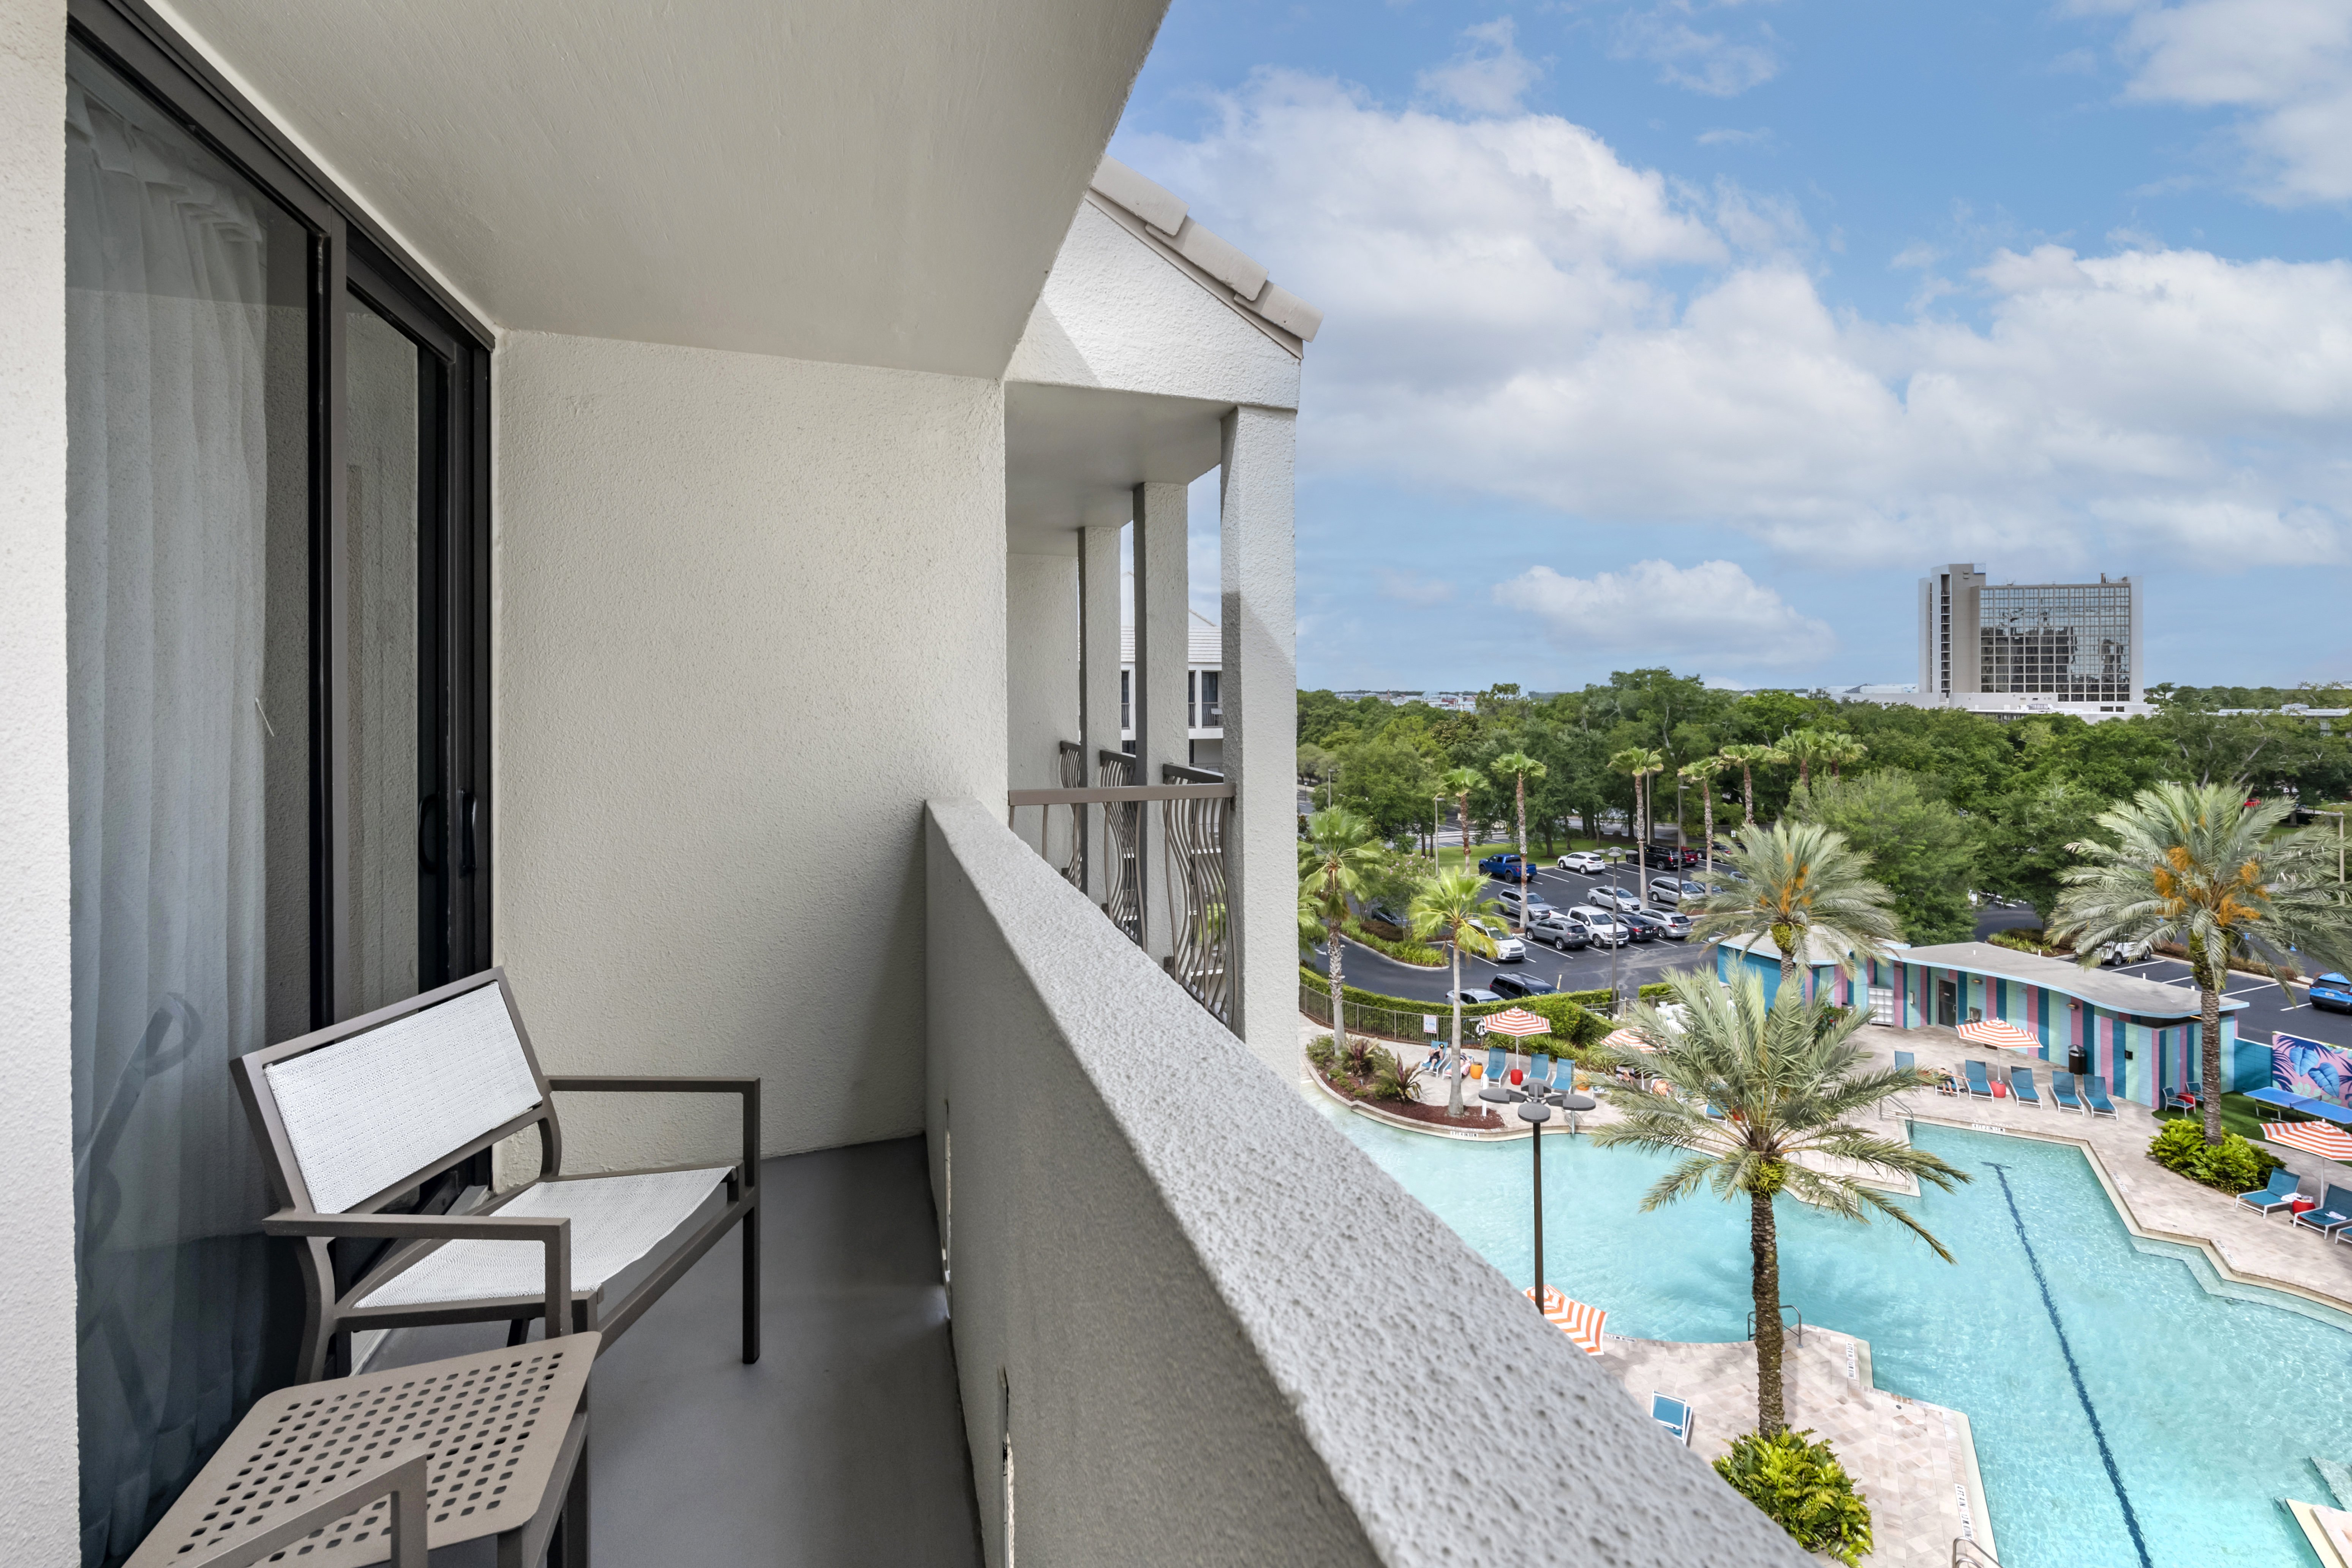 Sit back and relax on your balcony overlooking the pool